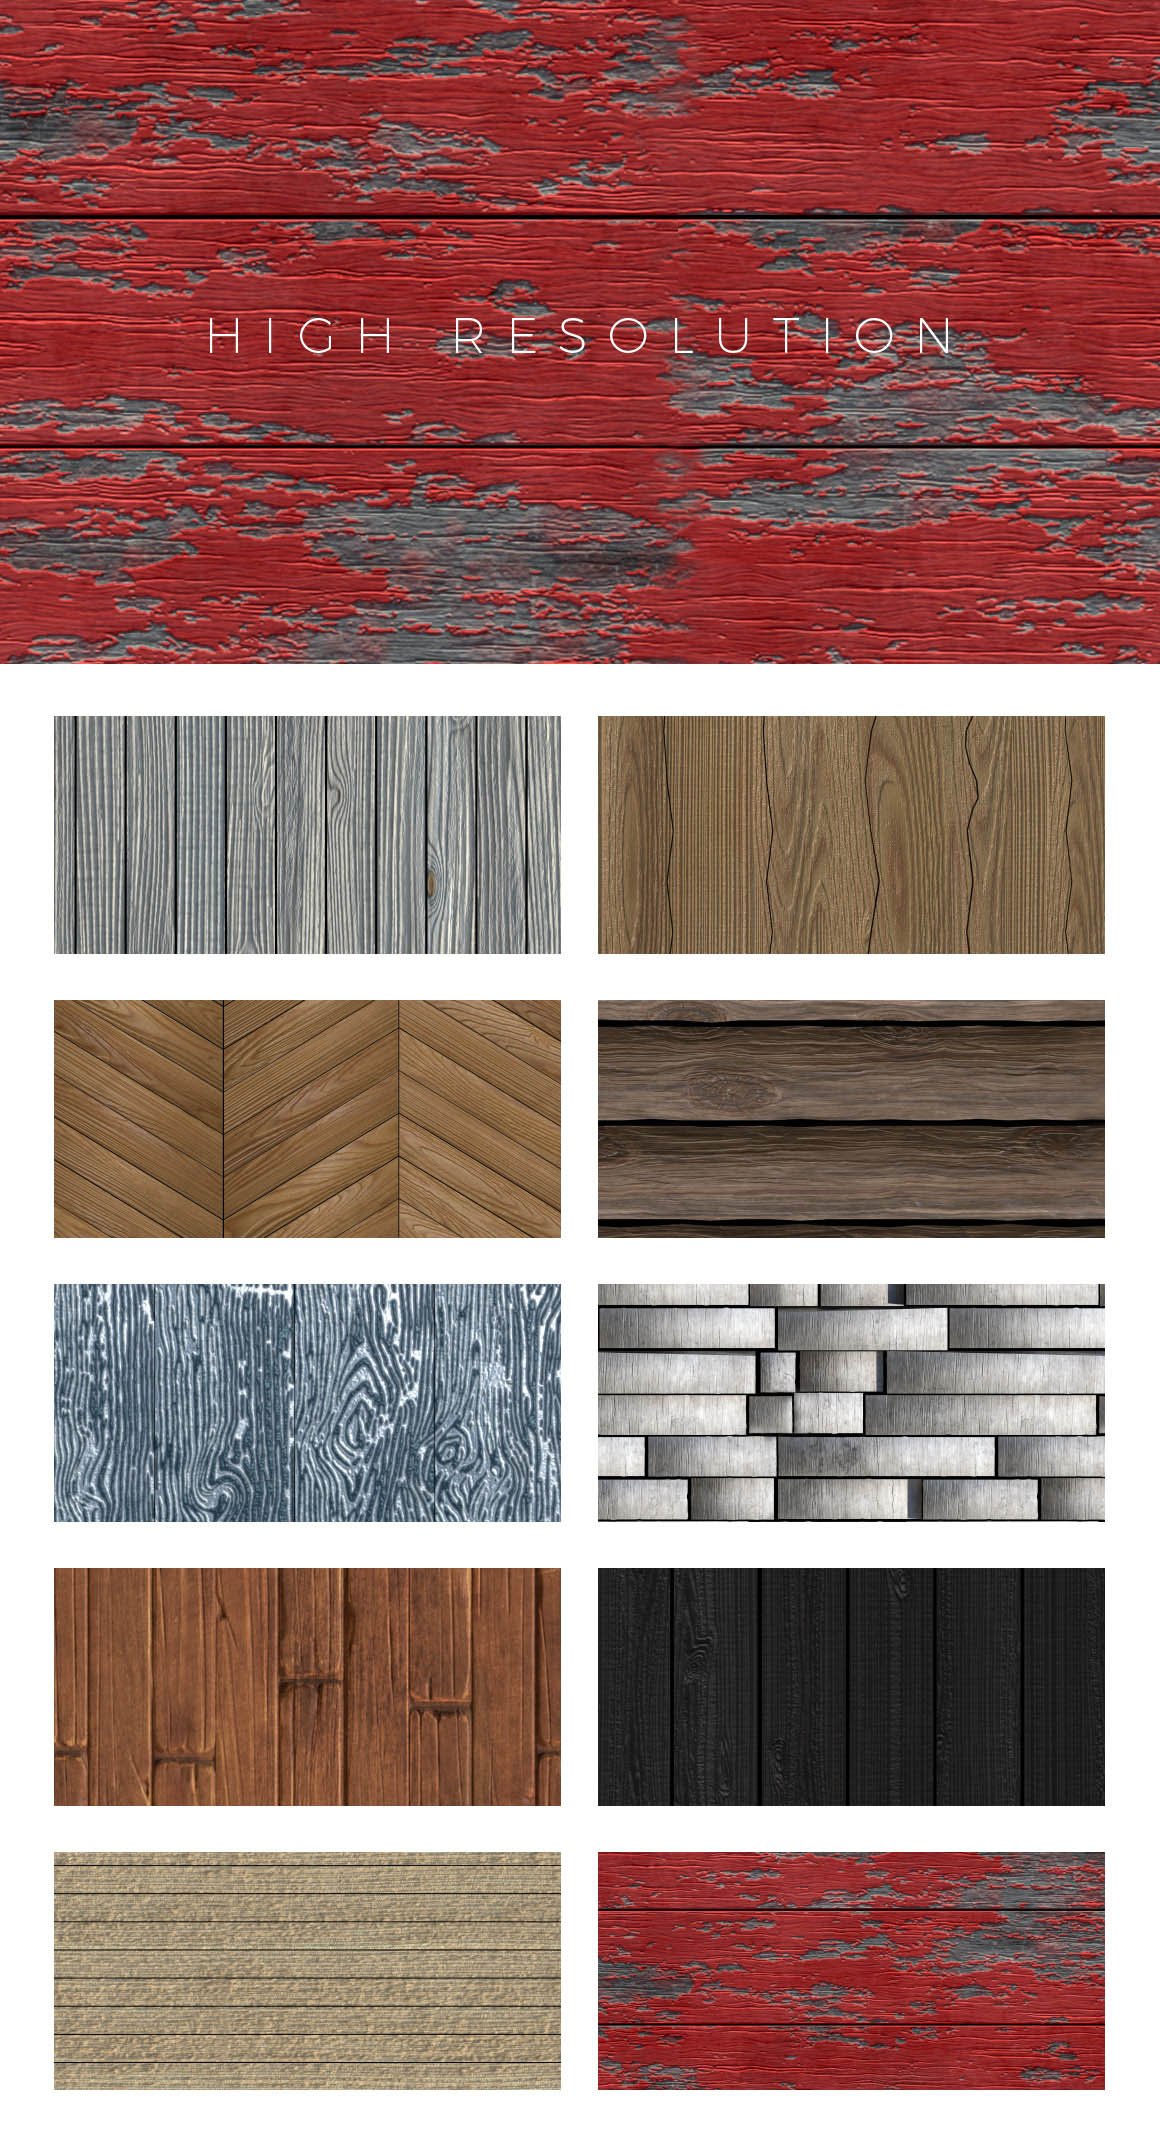 Seamless 3D Wood Patterns & Textures for Photoshop